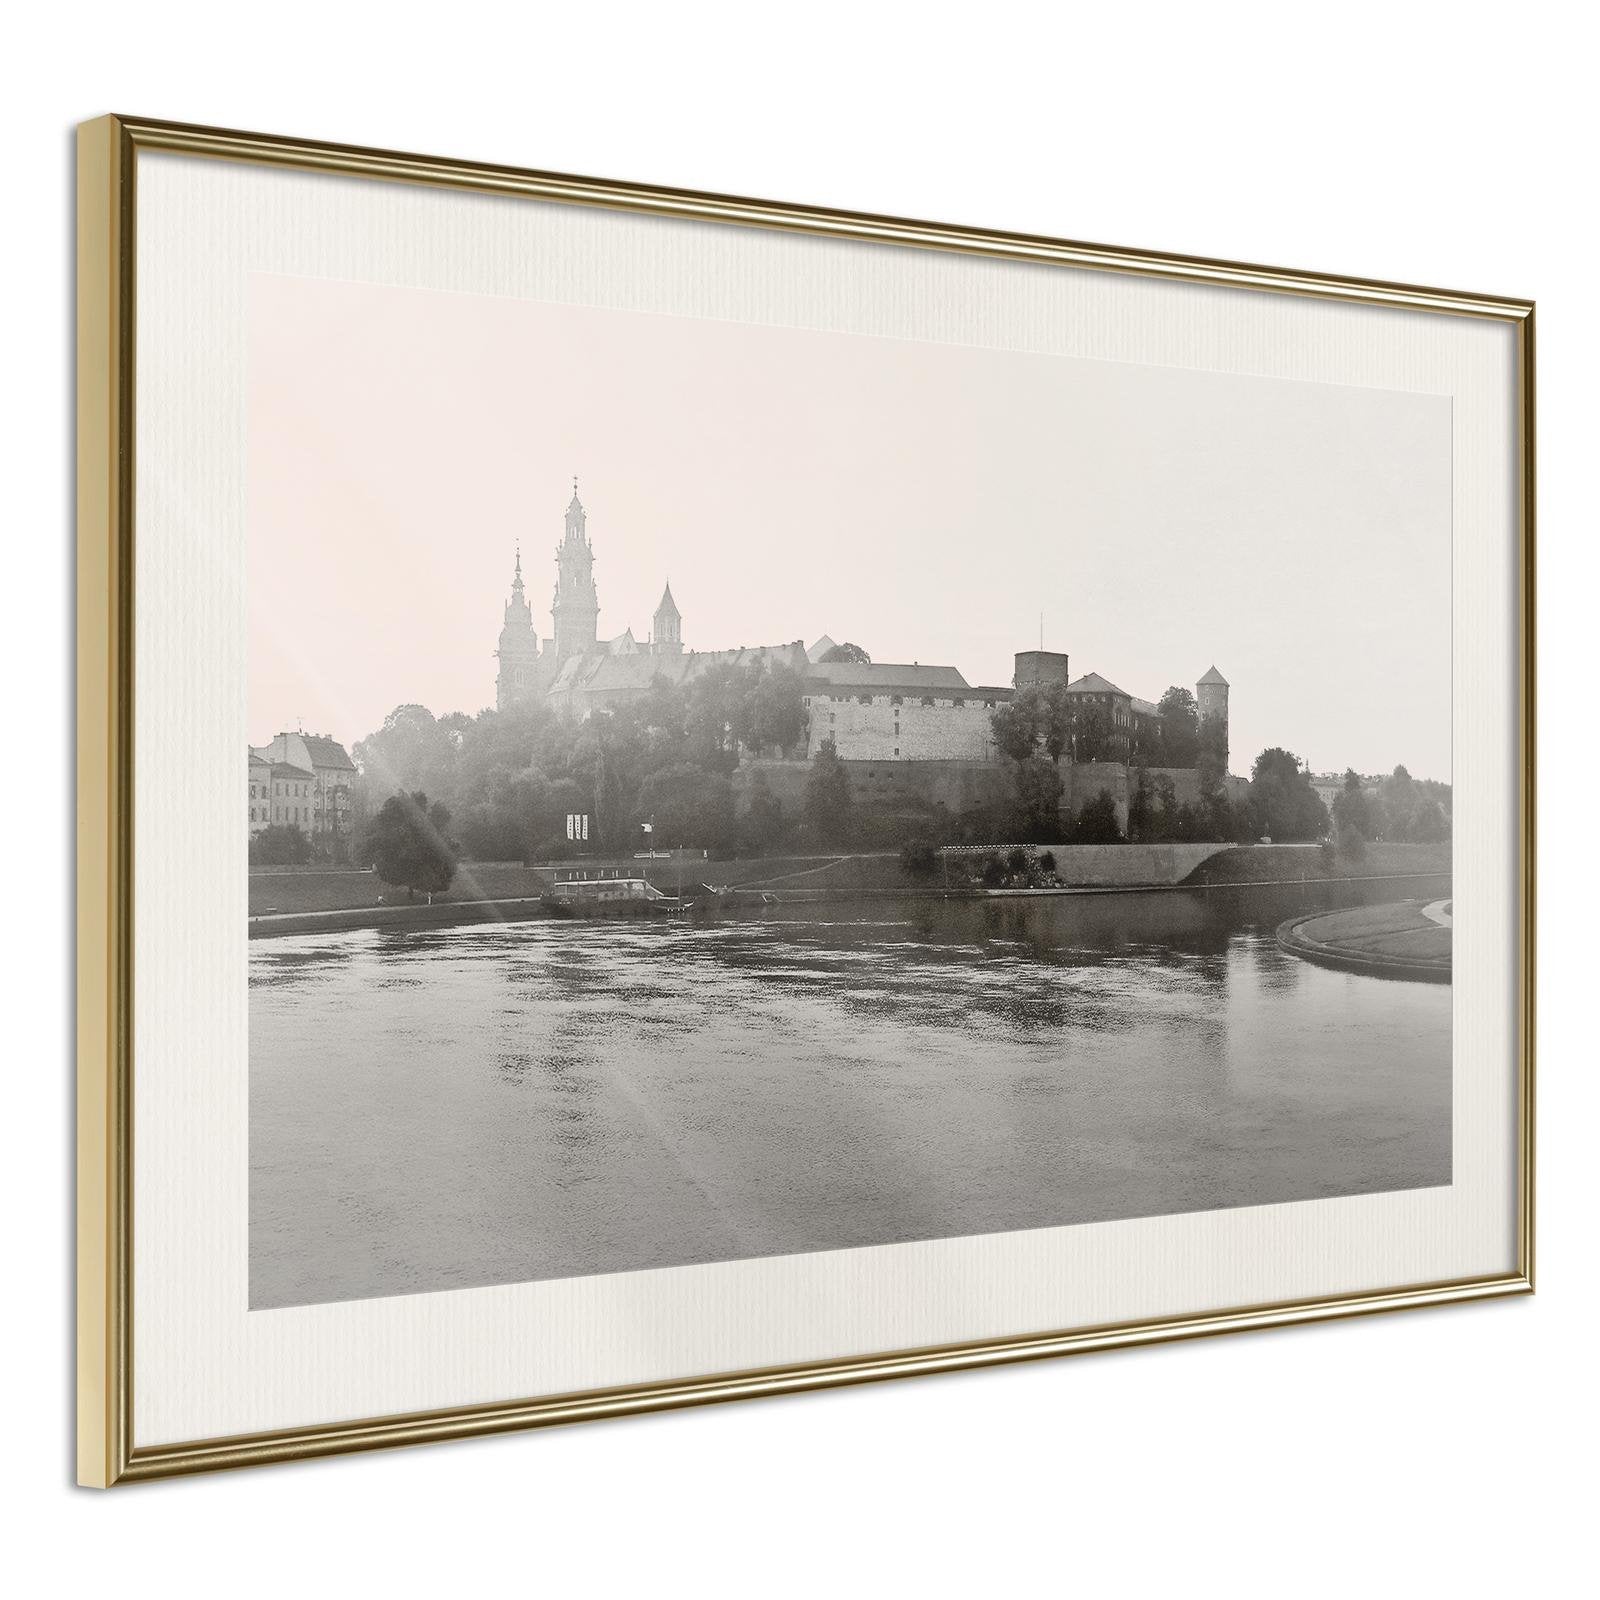 Inramad Poster / Tavla - Postcard from Cracow: Wawel I-Poster Inramad-Artgeist-90x60-Guldram med passepartout-peaceofhome.se